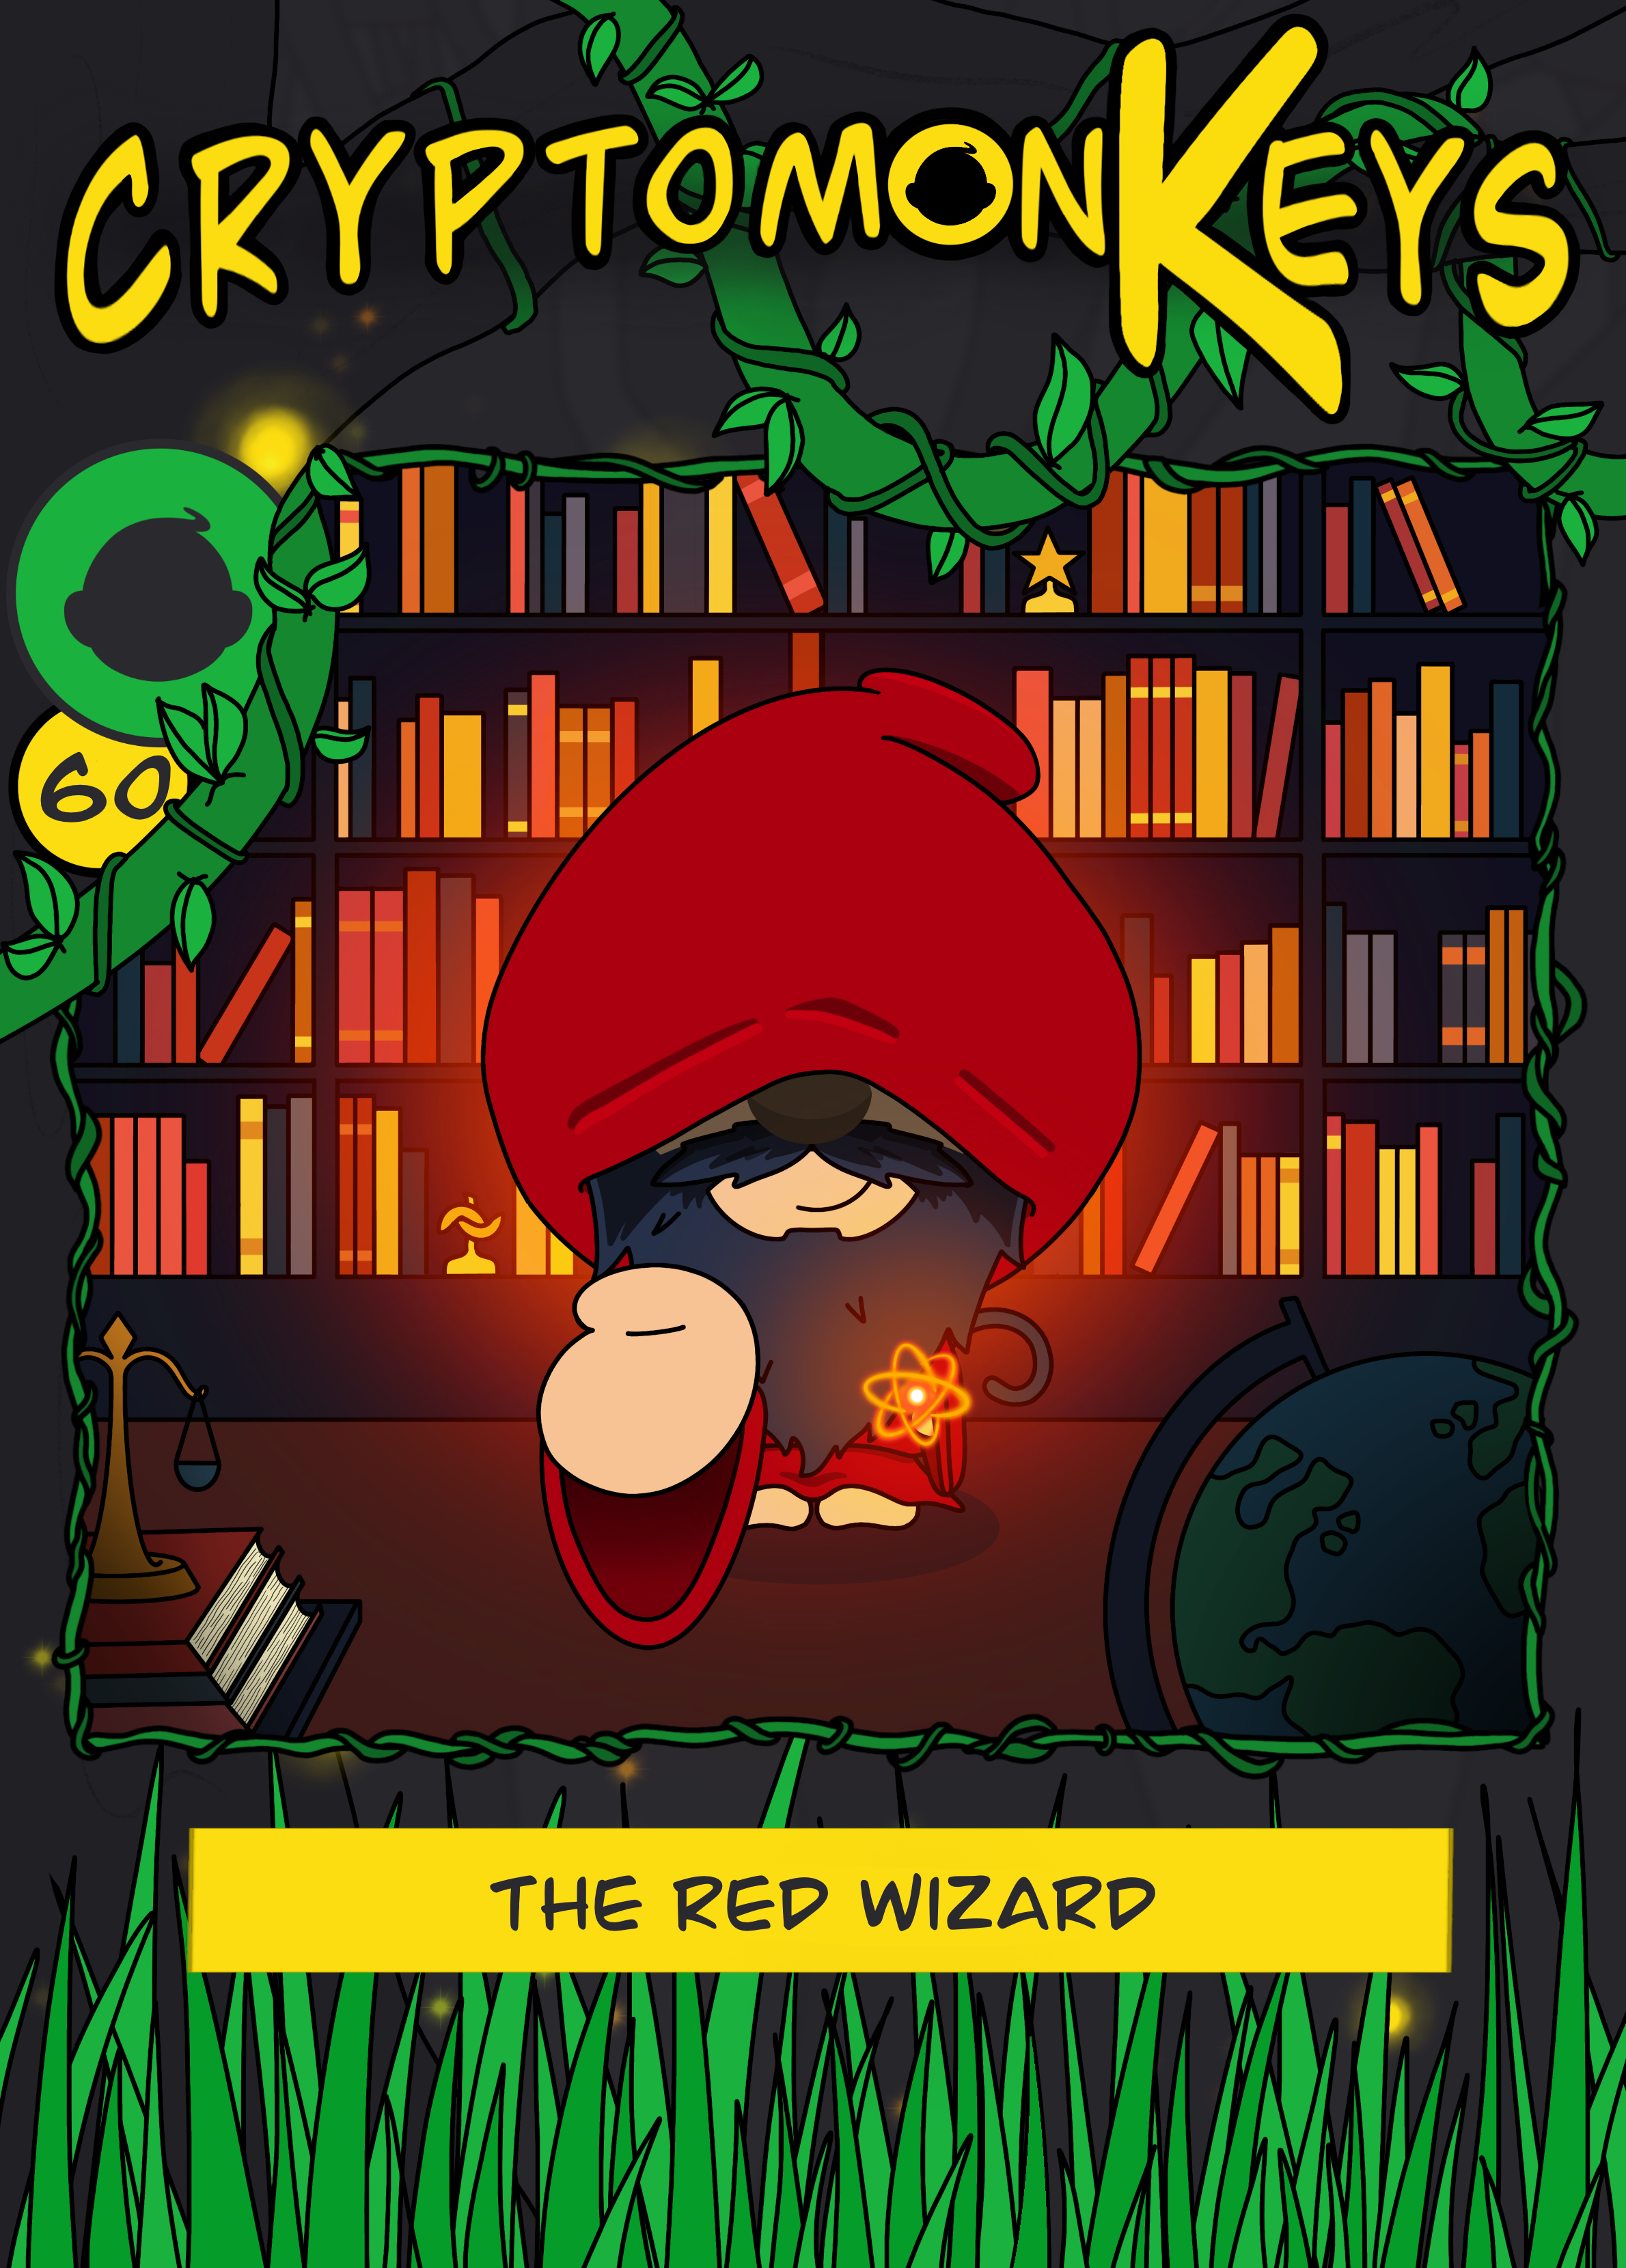 The Red Wizard